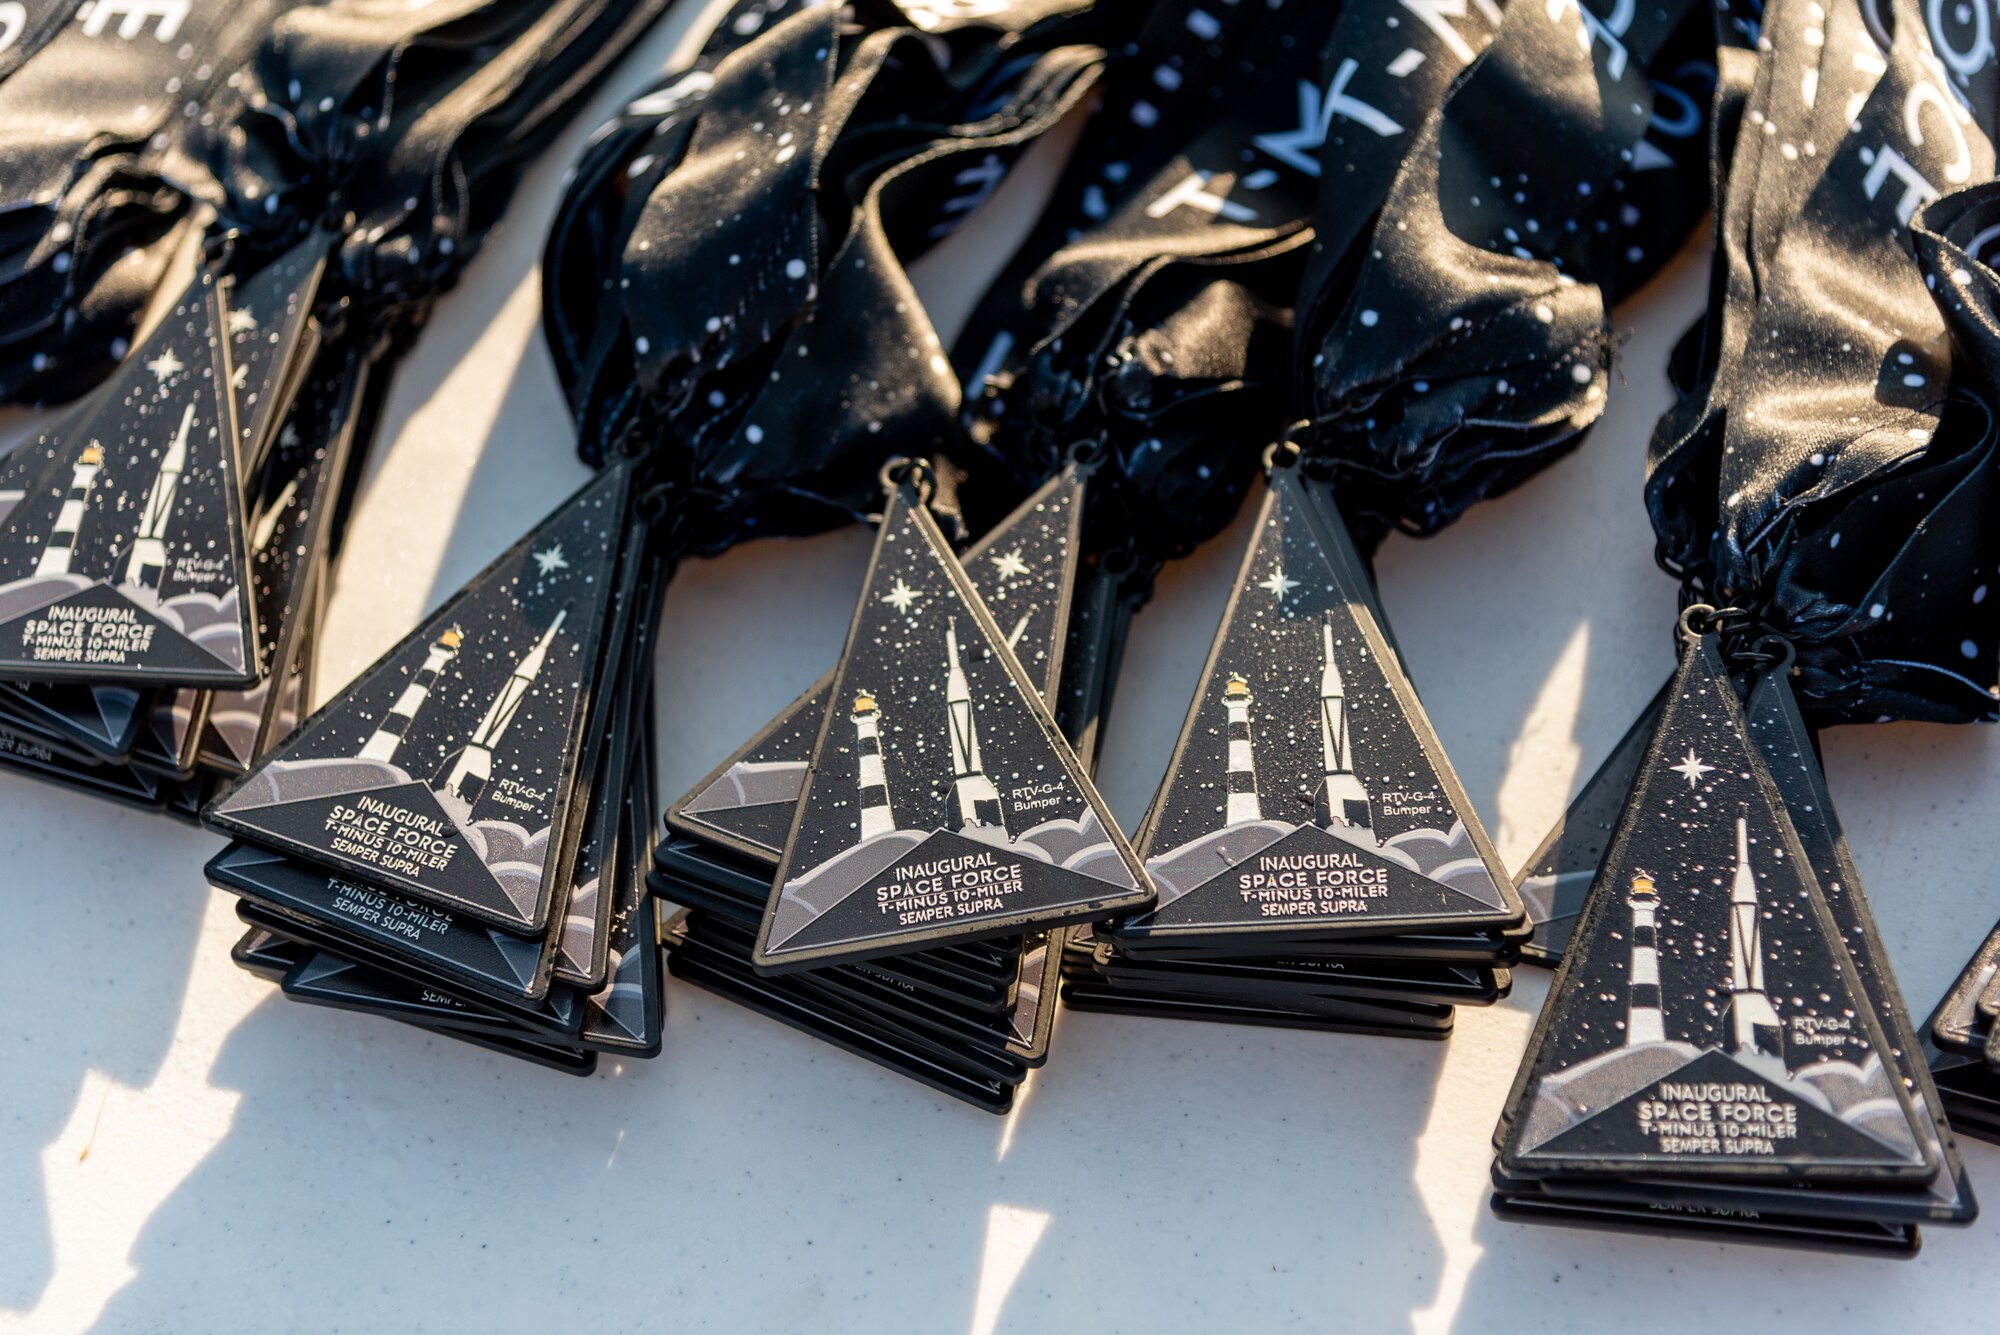 T-Minus 10-Miler participant medals stacked on a table on Dec. 10, 2022 at Cape Canaveral Space Force Station, Fla. The T-Minus 10-Miler celebrates the Space Forces birthday.